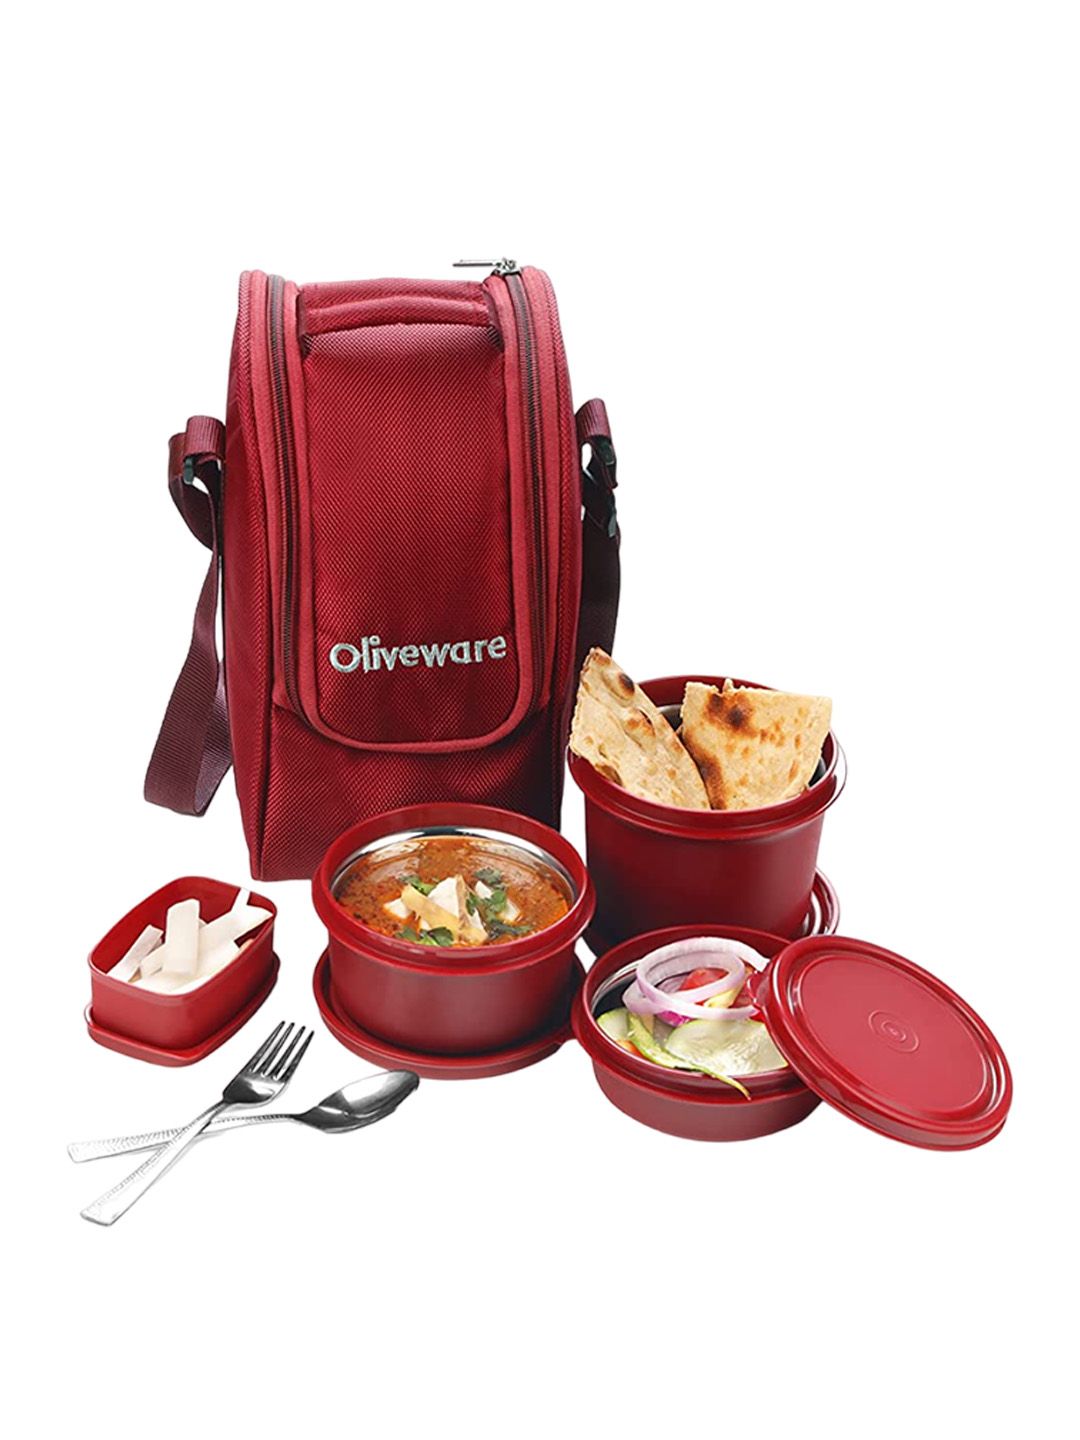 SOPL-OLIVEWARE Executive 7 Pcs Red Stainless Steel Leak Proof Lunch Box With Bag